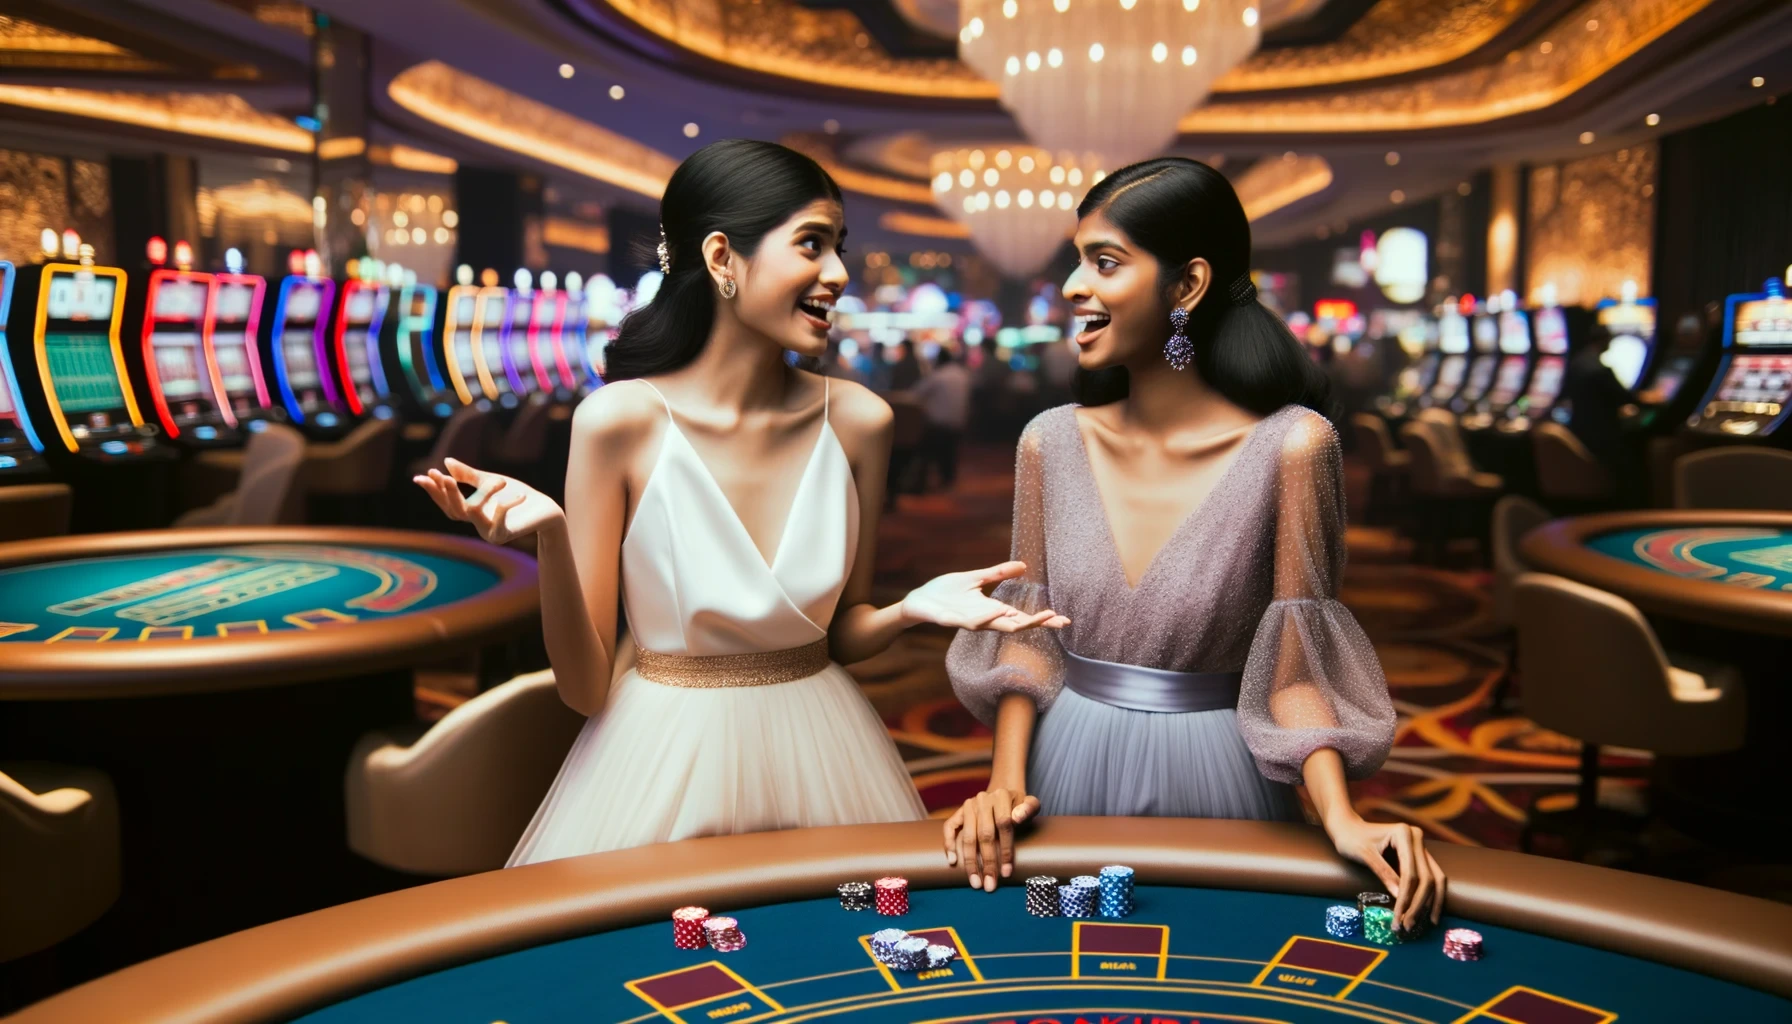 Basic Guide to Playing and Winning at Blackjack